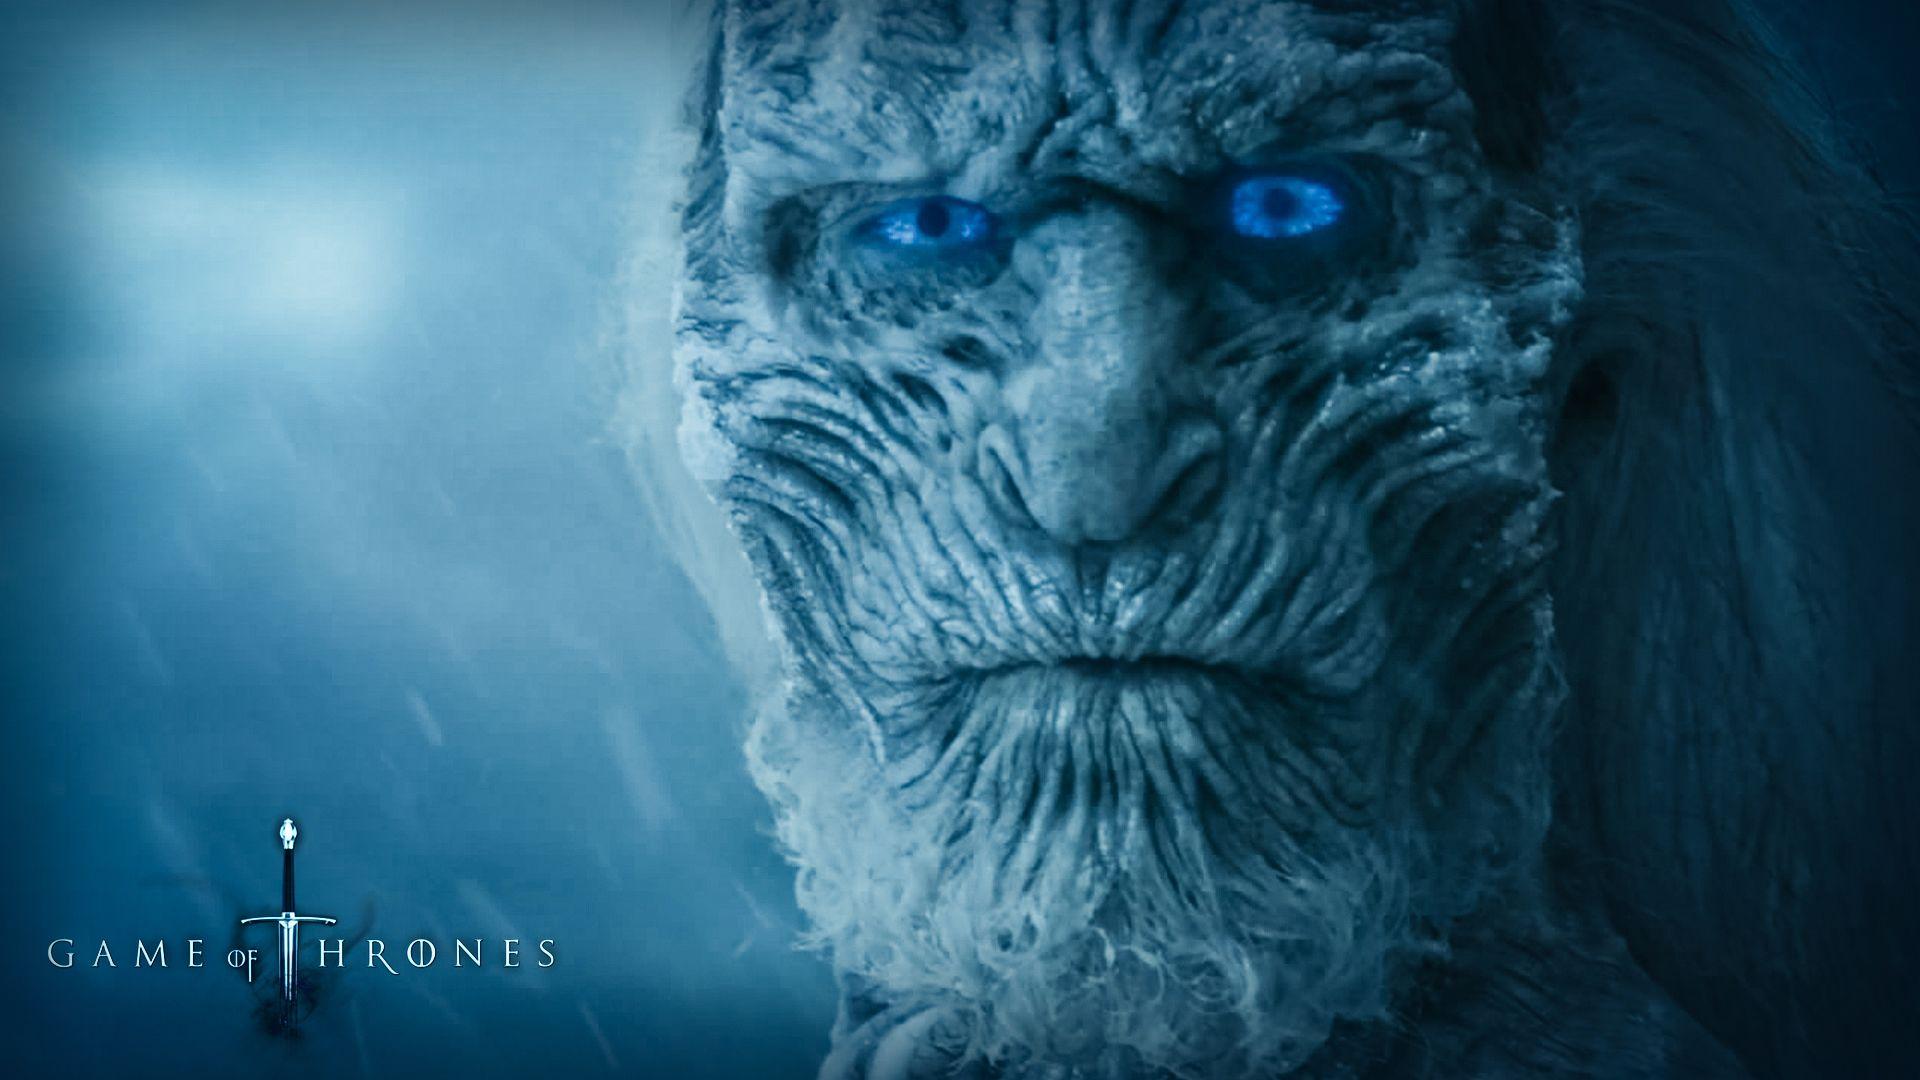 Game of Thrones image The White Walkers HD wallpaper and background